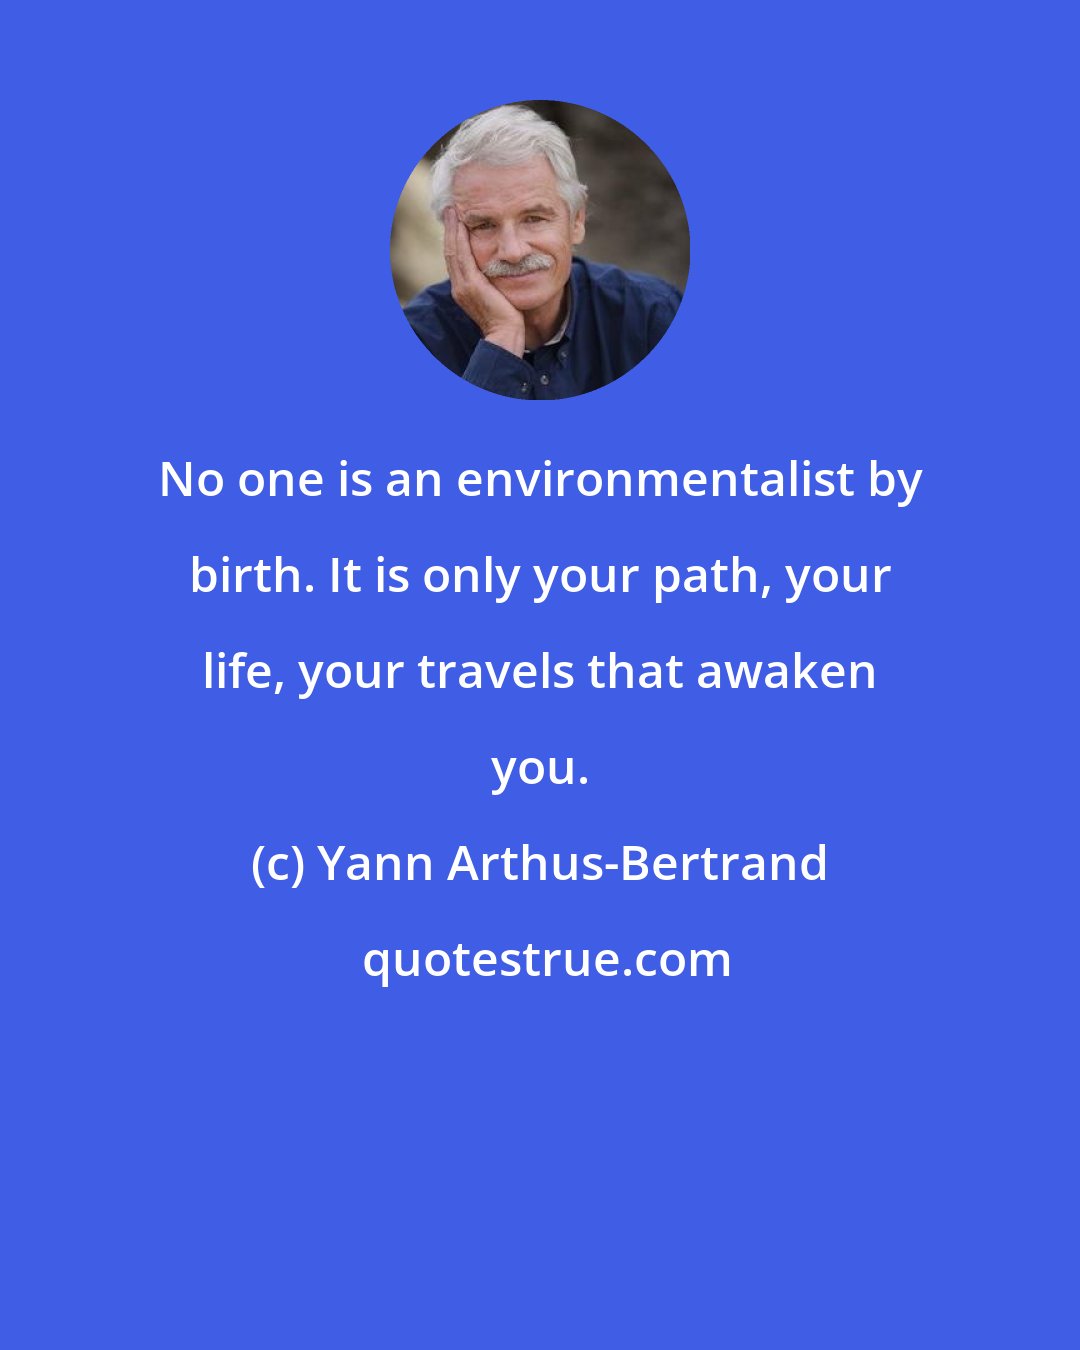 Yann Arthus-Bertrand: No one is an environmentalist by birth. It is only your path, your life, your travels that awaken you.